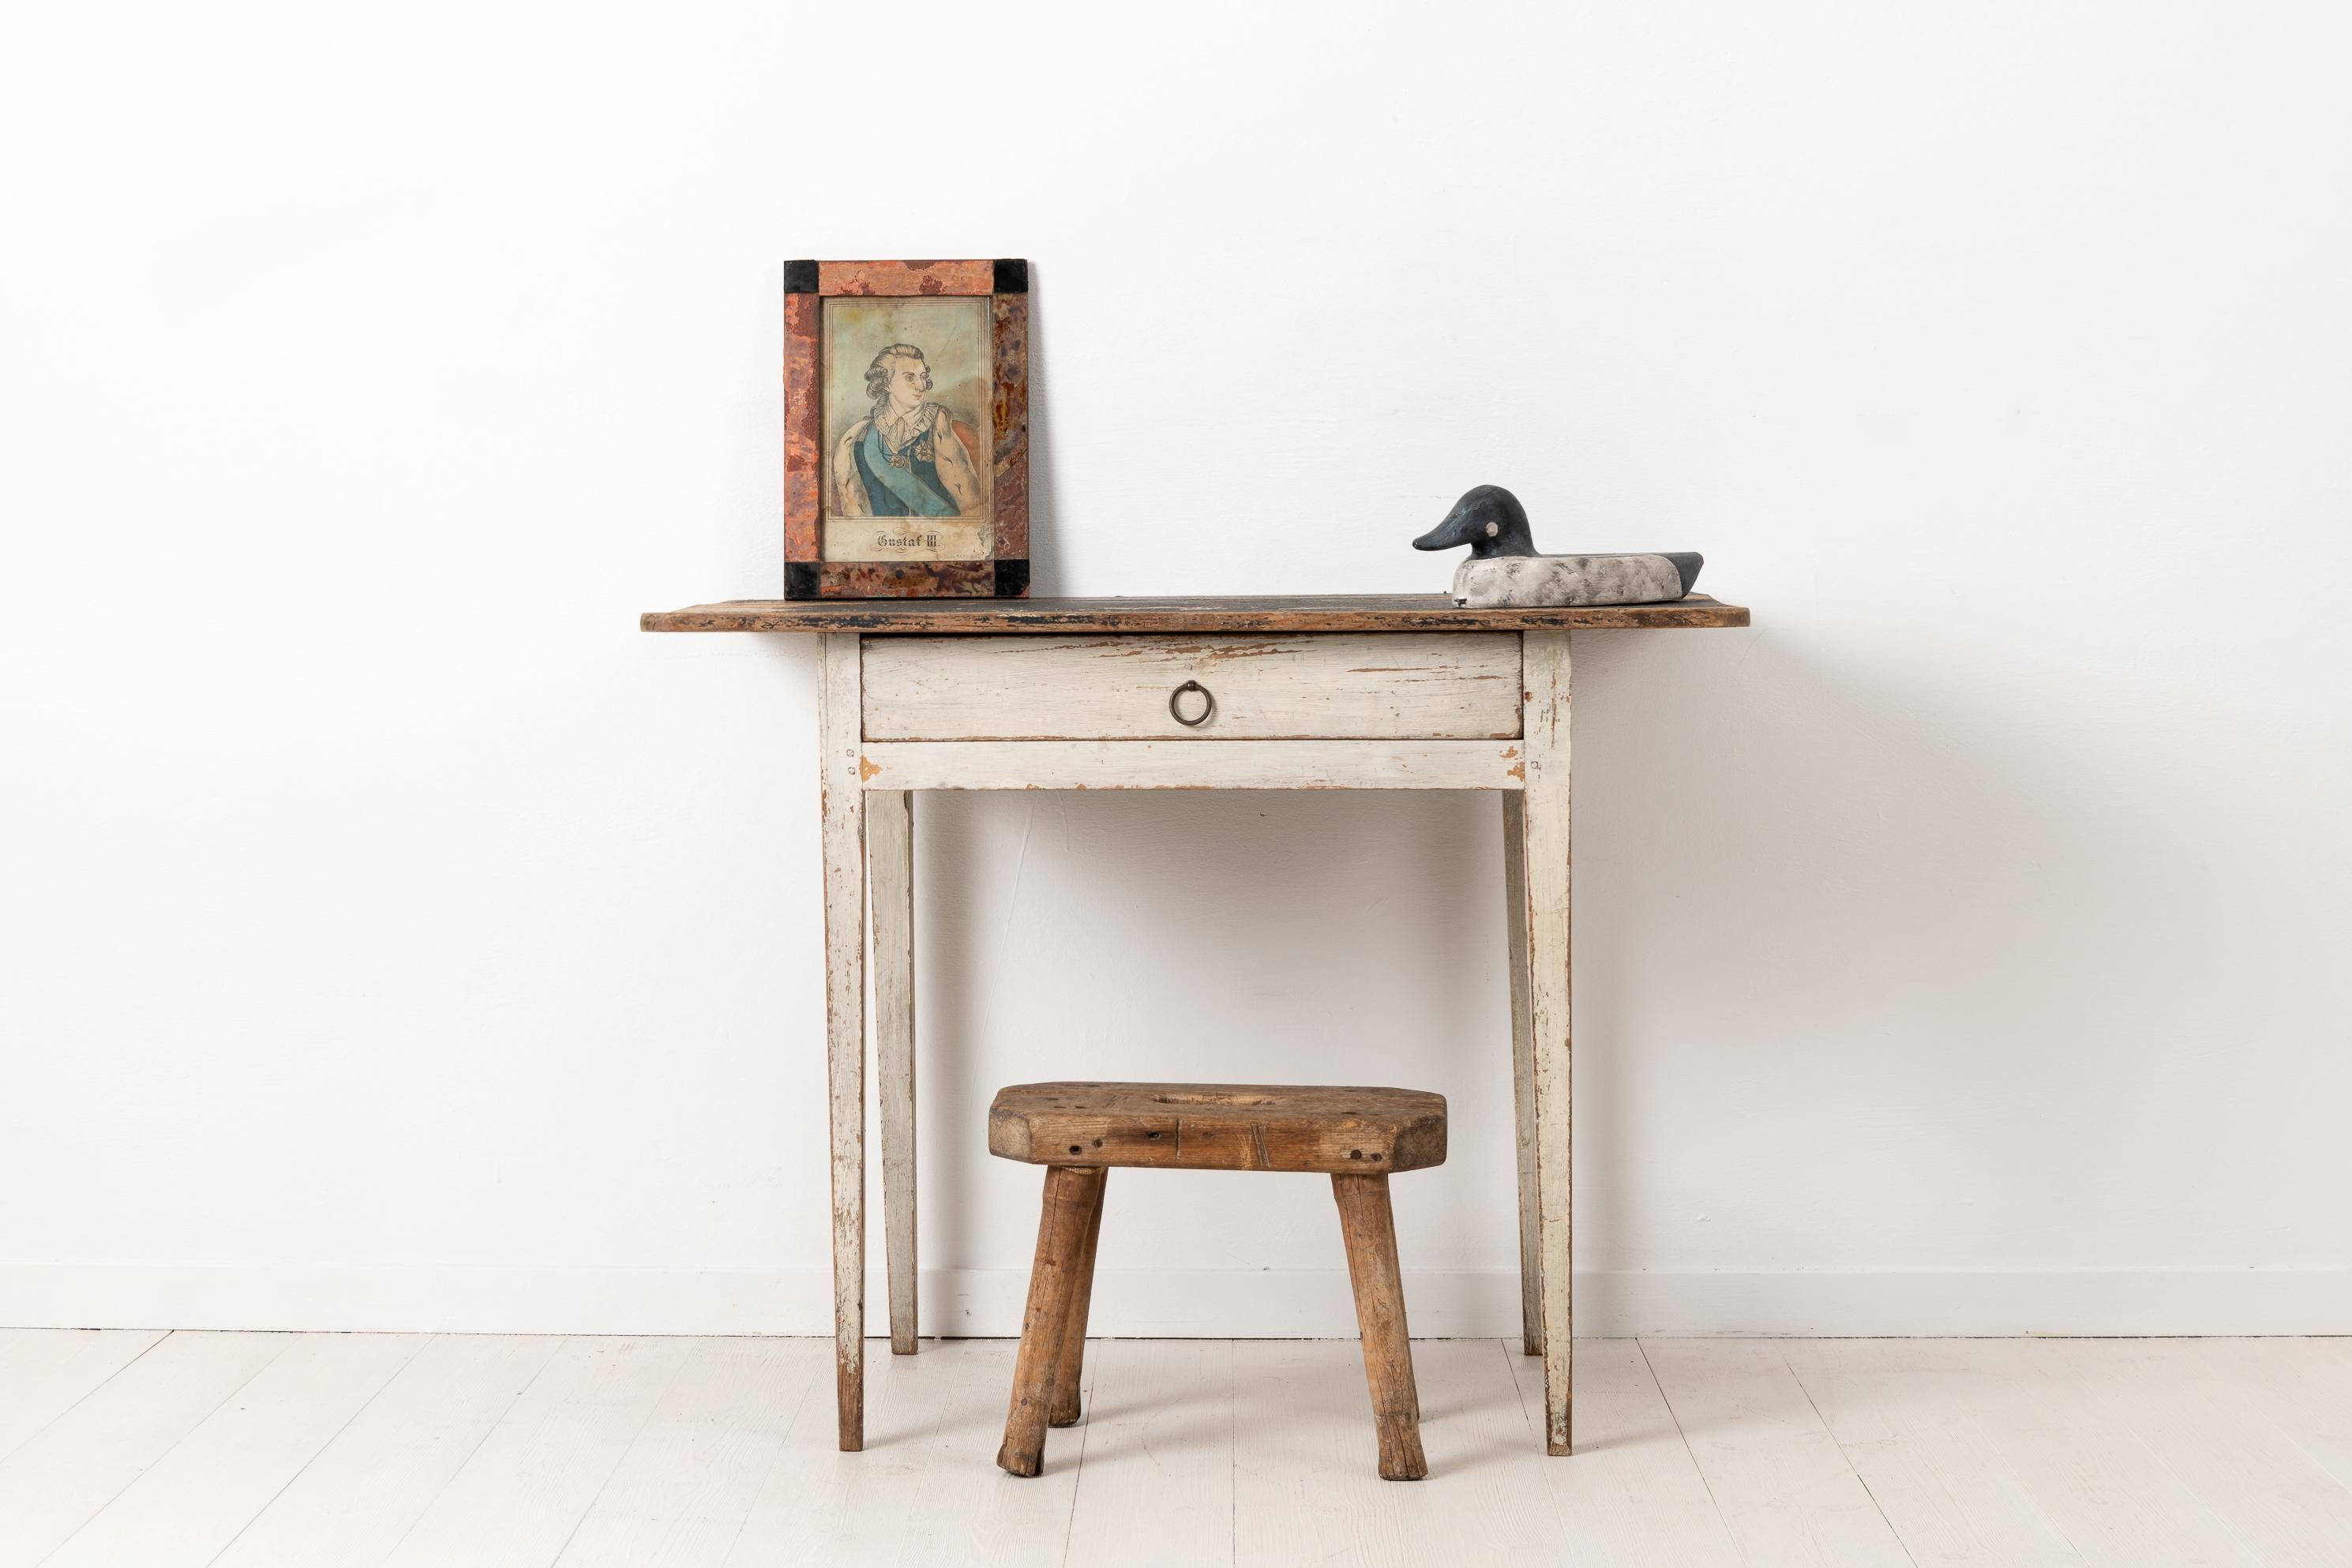 Swedish Gustavian desk with white distressed paint. The table is from the late 18th century, circa 1790-1800. Made in pine with distressed white and black paint as well as a genuine patina after almost 250 years of use. Made in the northern part of